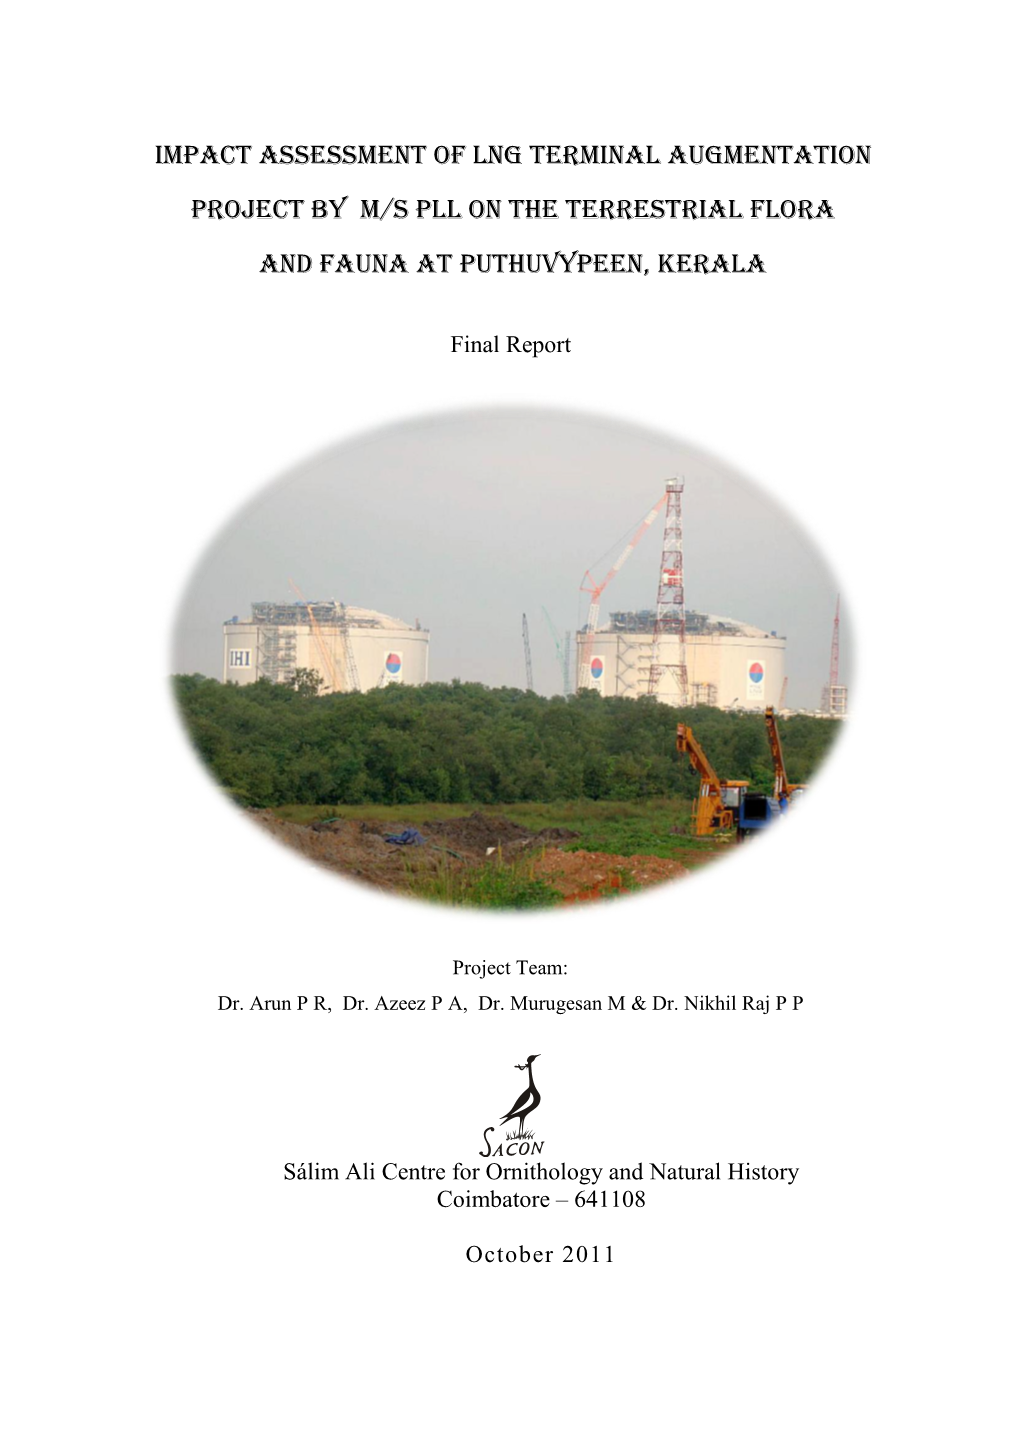 IMPACT ASSESSMENT of LNG TERMINAL AUGMENTATION PROJECT by M/S PLL on the TERRESTRIAL FLORA and FAUNA at PUTHUVYPEEN, KERALA